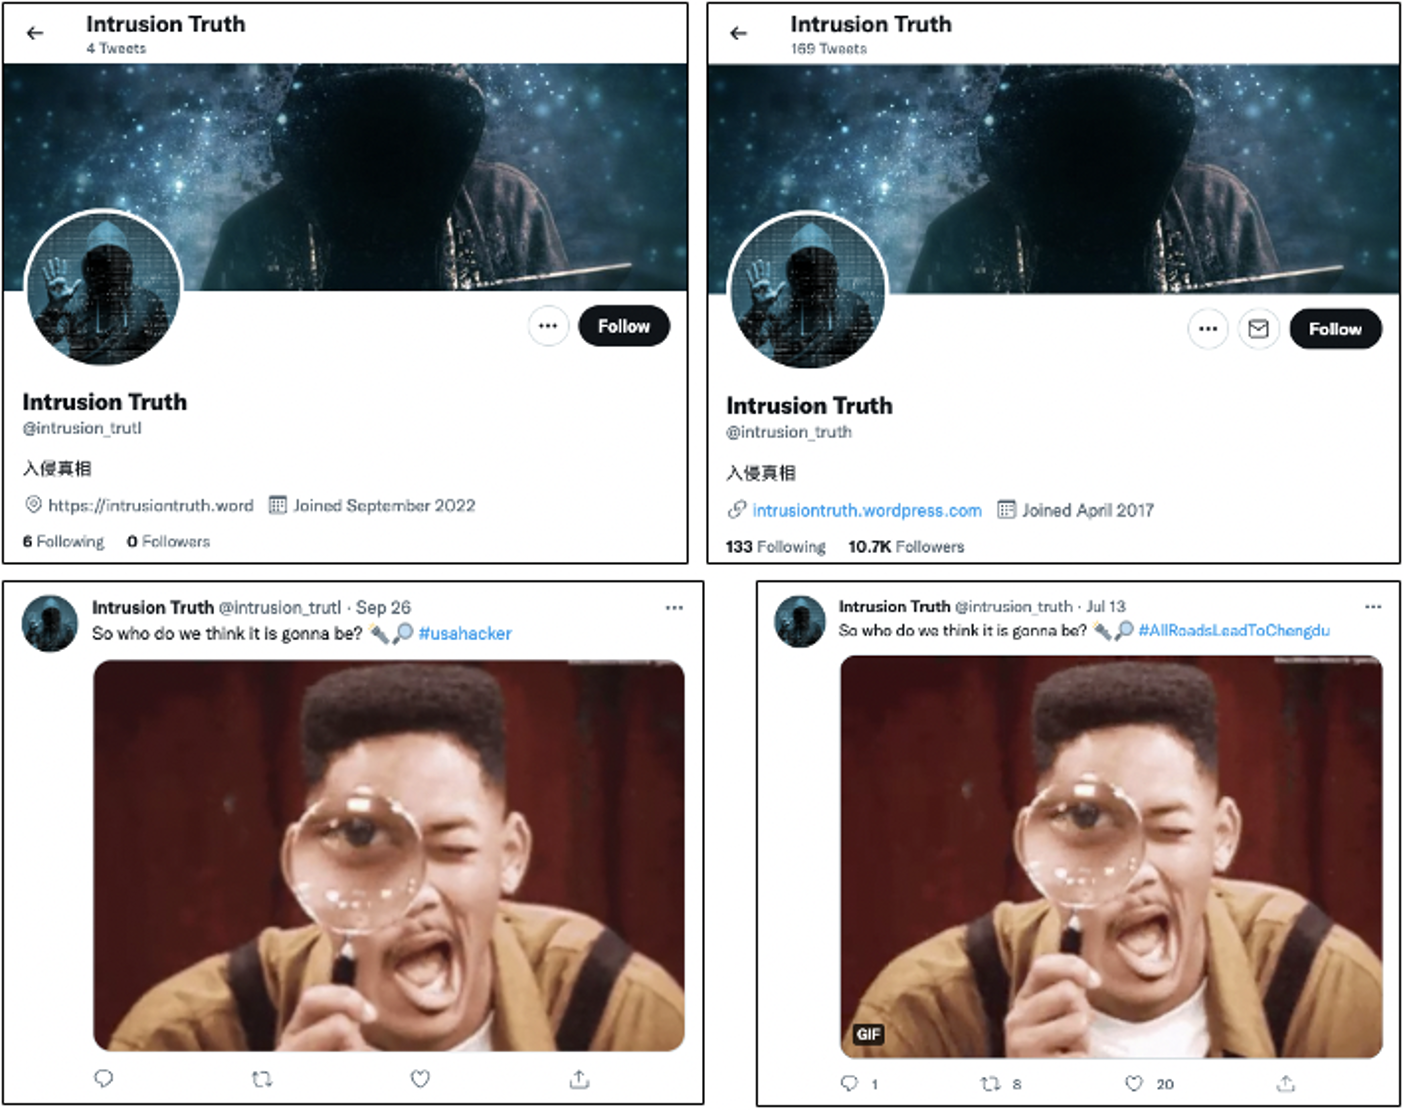 Mastheads of sample DRAGONBRIDGE account (@intrusion_trutl) (top left) impersonating Intrusion Truth (@intrusion_truth) (top right); sample tweet plagiarized and altered by @intrusion_trutl, changing the hashtag to #usahacker (bottom left) from @intrusion_truth’s #AllRoadsLeadToChengdu (bottom right)